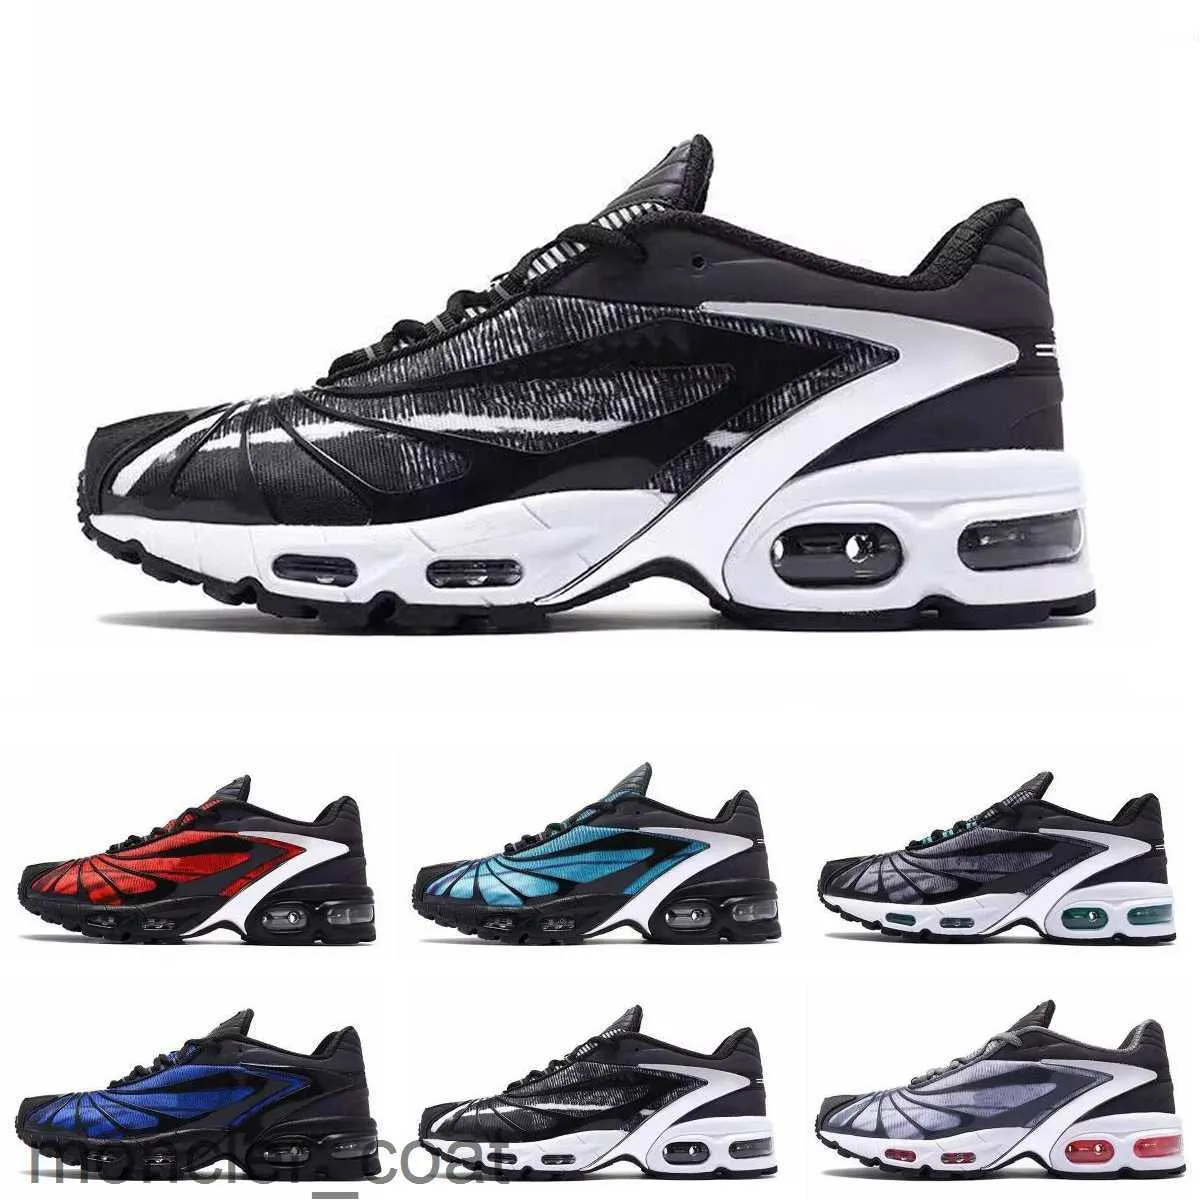 TW Skepta X Tailwind V Mens Running Shoes Bloody Chrome Deep Bright Blue Chaos White Black Gold Men Mesh Trainers Sports Sneakers